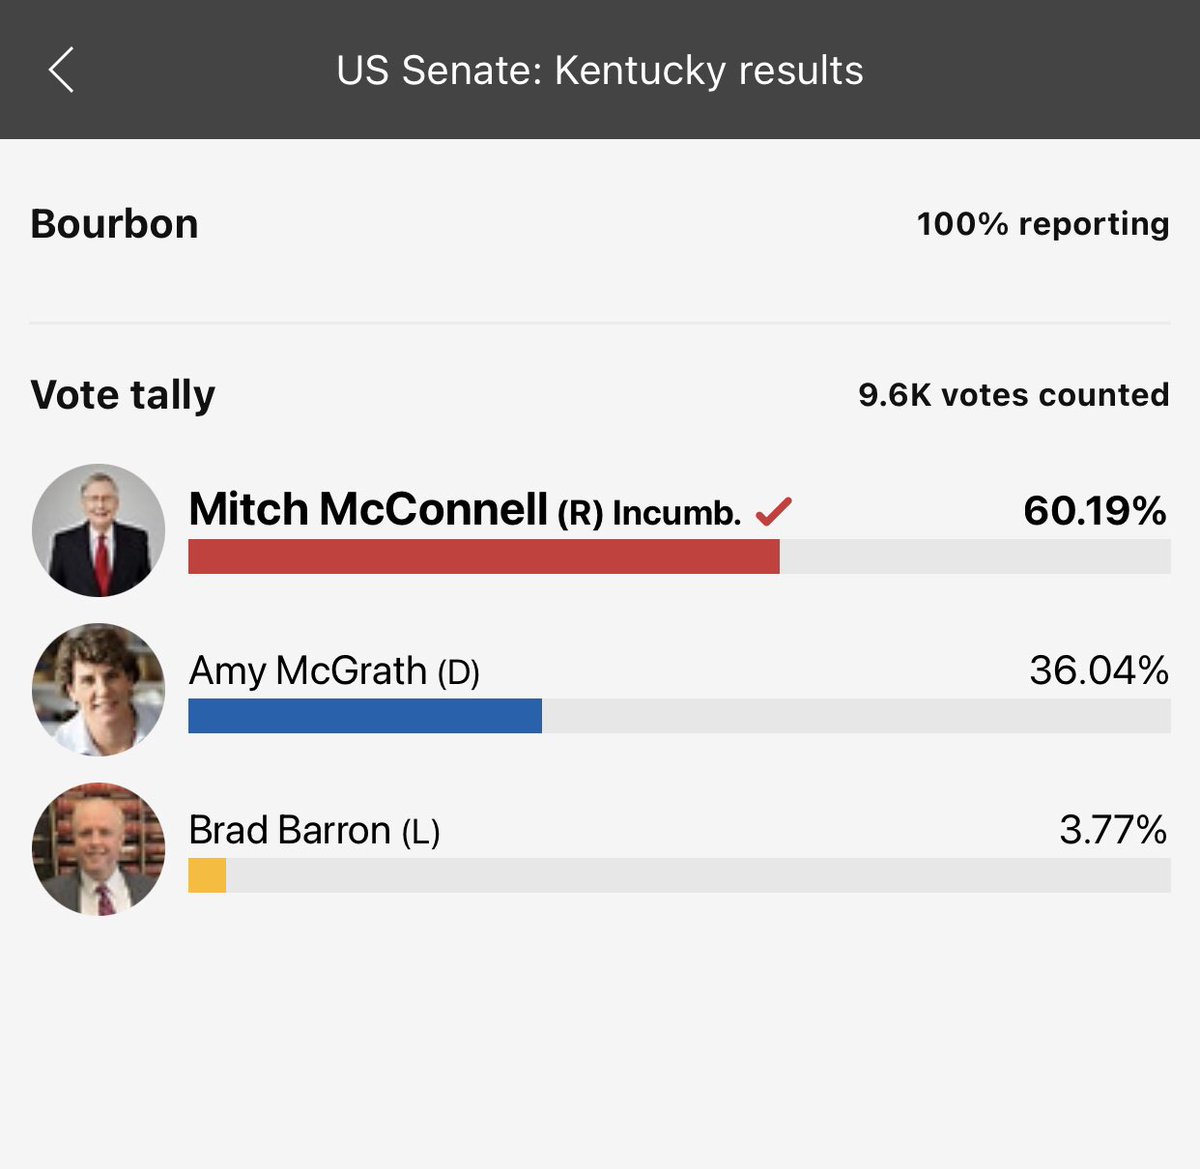 BOURBON - Mitch won 60.19% of 9,600 votes - roughly 5,778 votes. There are 5,582 Registered Republicans, 8,326 Democrats, & 1,149 other.